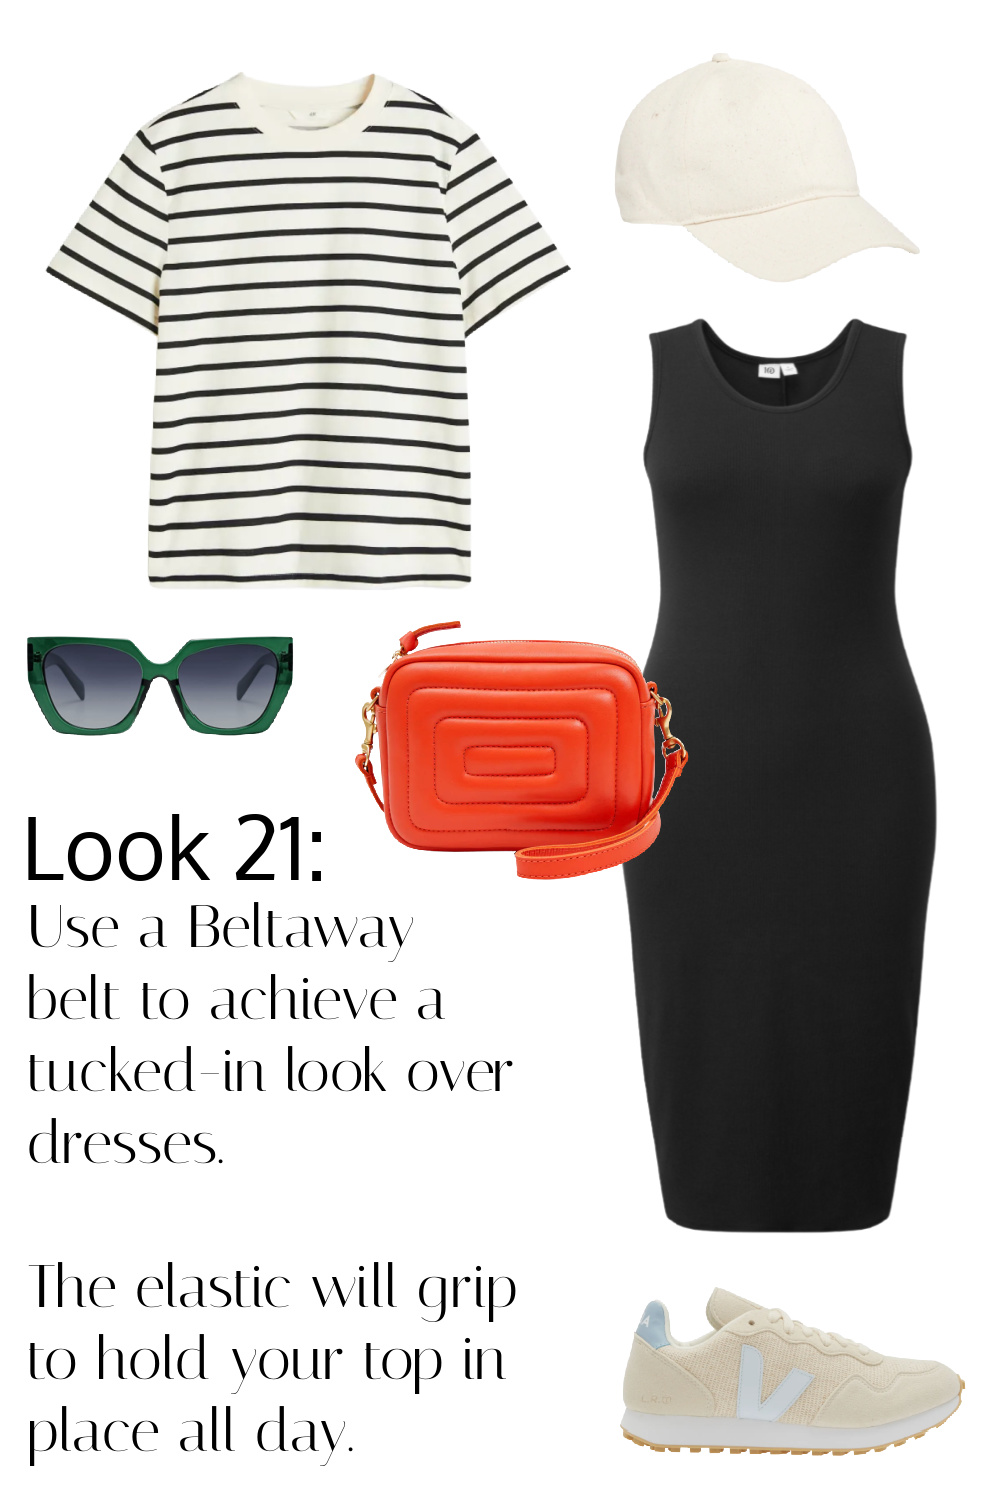 The striped tee and the black tank dress with sneakers and orange crossbody. Use a Beltaway belt to achieve a tucked-in look over dresses. The elastic will grip to hold your top in place all day.